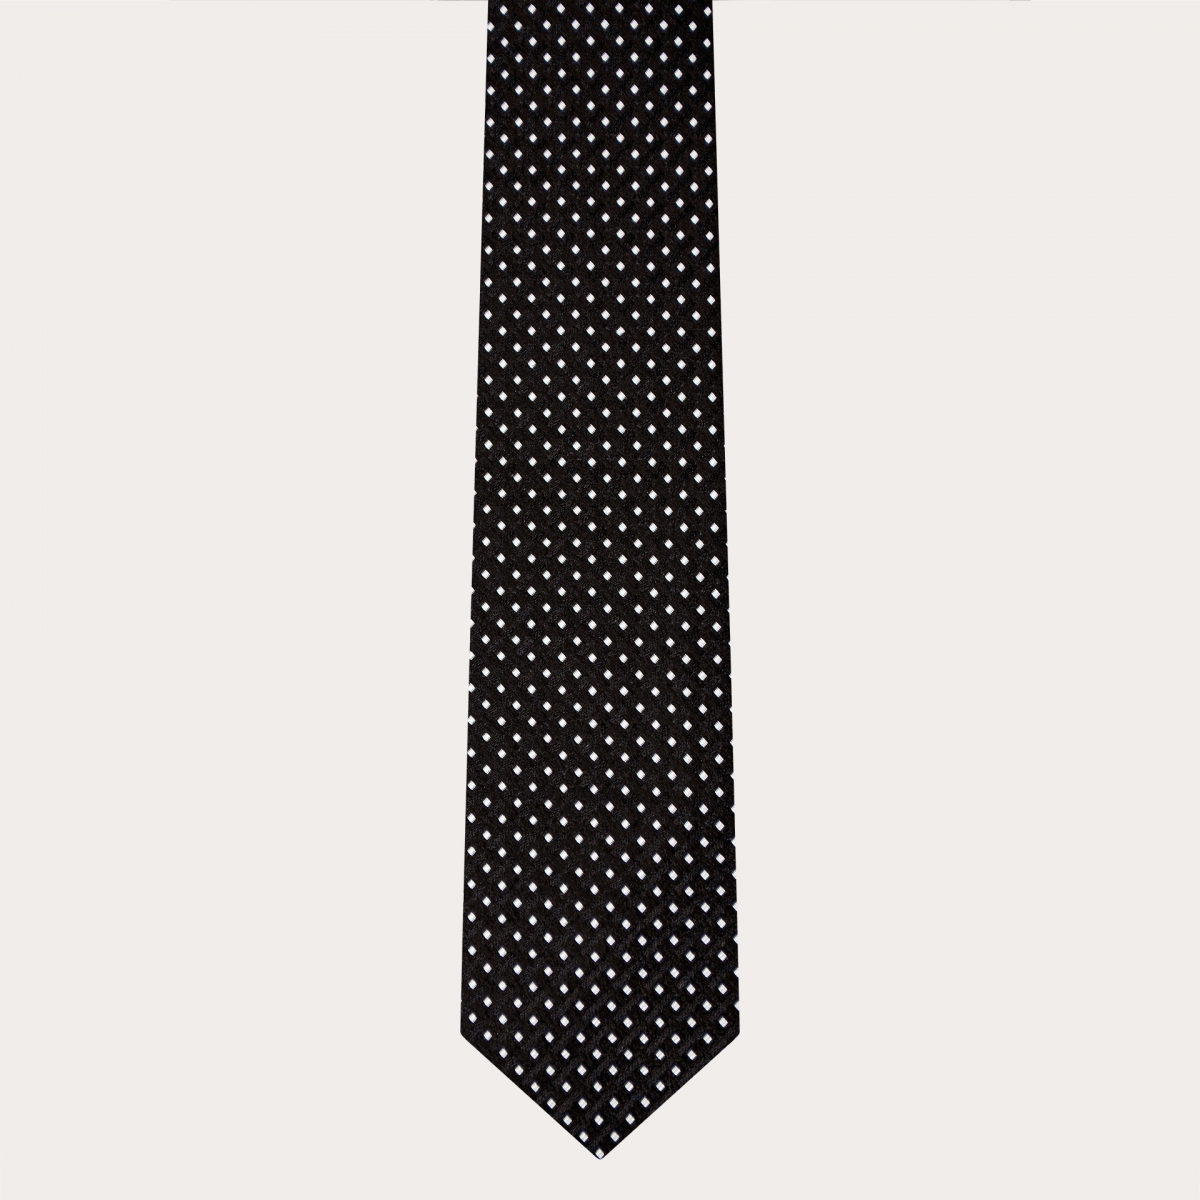 BRUCLE Ceremony set tie and pocket square, black with geometric dotted pattern